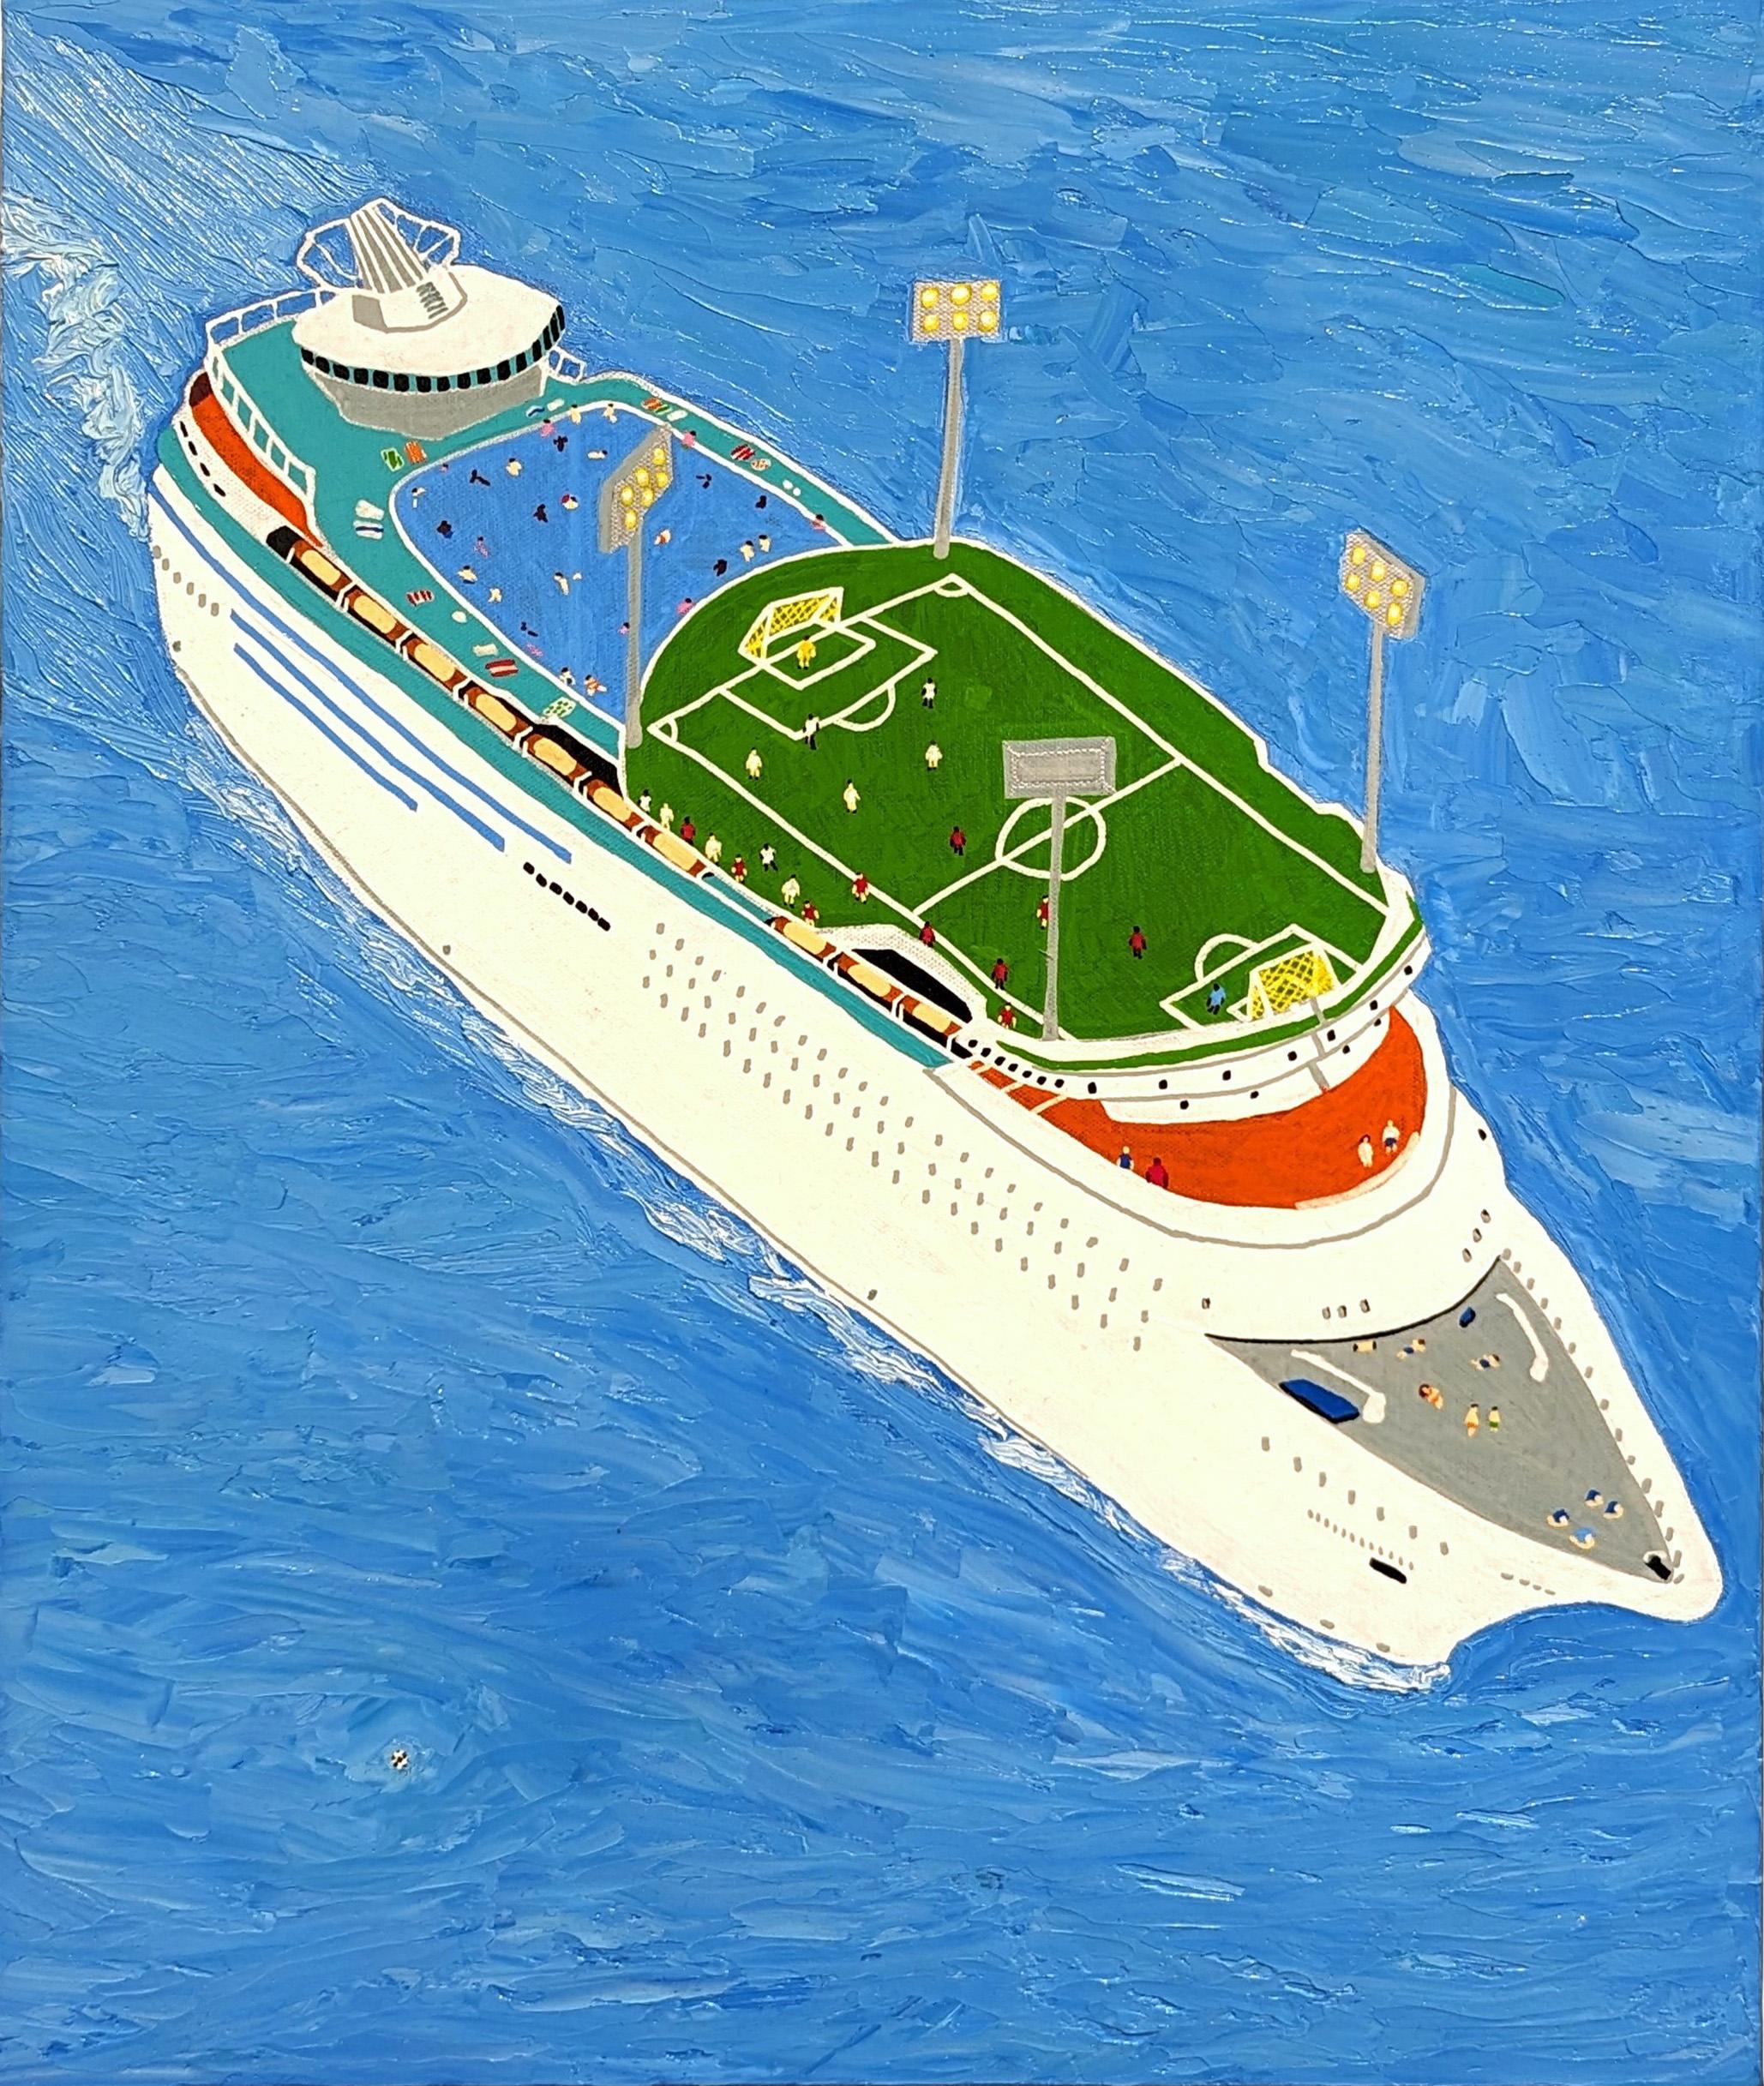 Colorful humorous painting by Memphis-based contemporary artist Alex Paulus. The work features a cruise ship with many small figures participating in a variety of activities including swimming, soccer, and sunbathing. The title, "I guess that's the